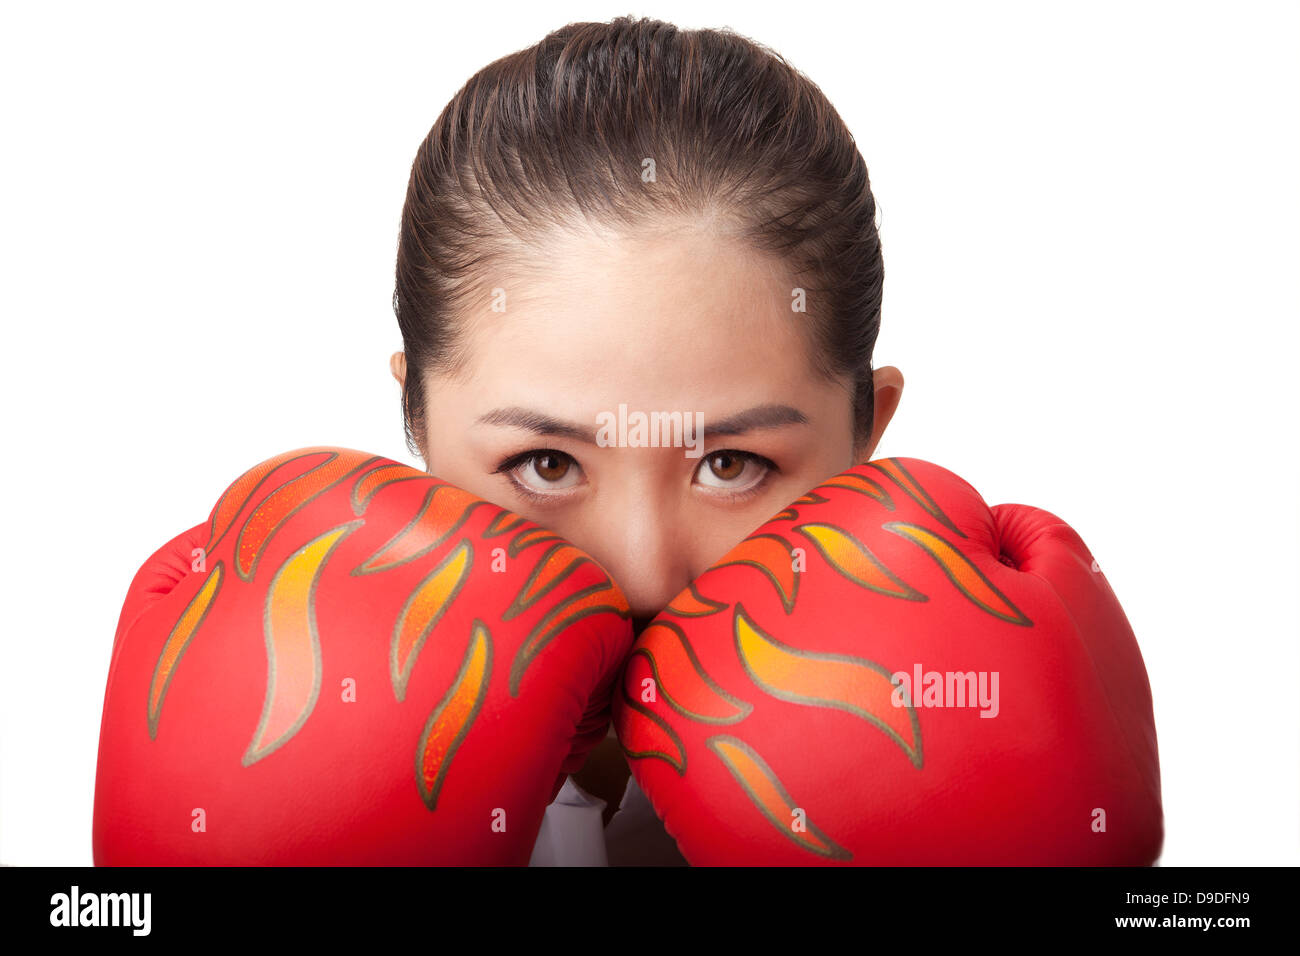 Business woman wearing boxing gloves Stock Photo